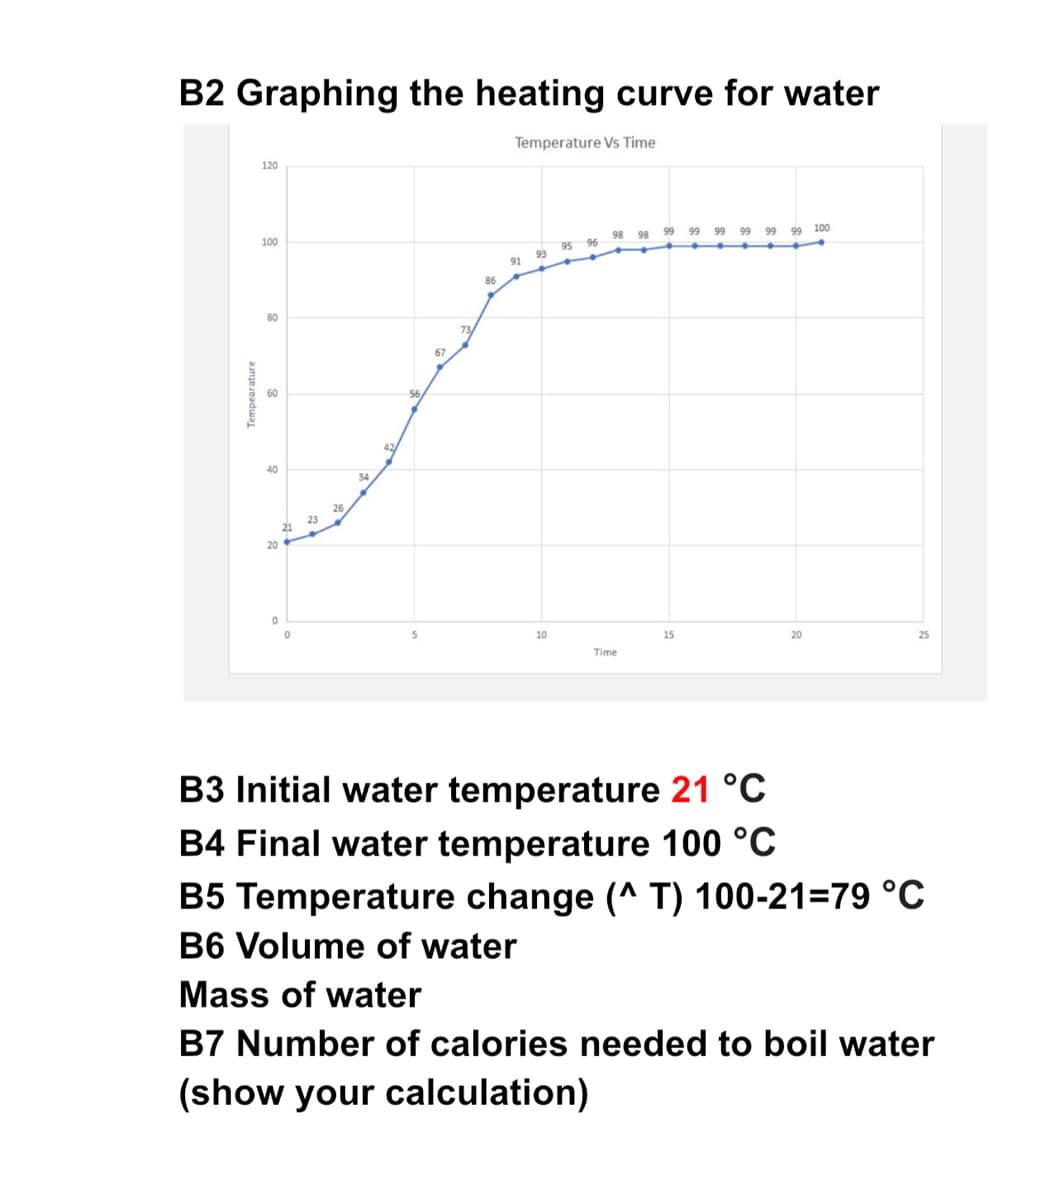 B2 Graphing the heating curve for water
Temperature Vs Time
120
100
98
98 99
99 99
99
99
99 100
96
95
93
91
86
80
73
67
56,
40
34
26
23
21
20
5
10
15
20
25
Time
B3 Initial water temperature 21 °C
B4 Final water temperature 100 °C
B5 Temperature change (^ T) 100-21=79 °C
B6 Volume of water
Mass of water
B7 Number of calories needed to boil water
(show your calculation)
Tempearature
